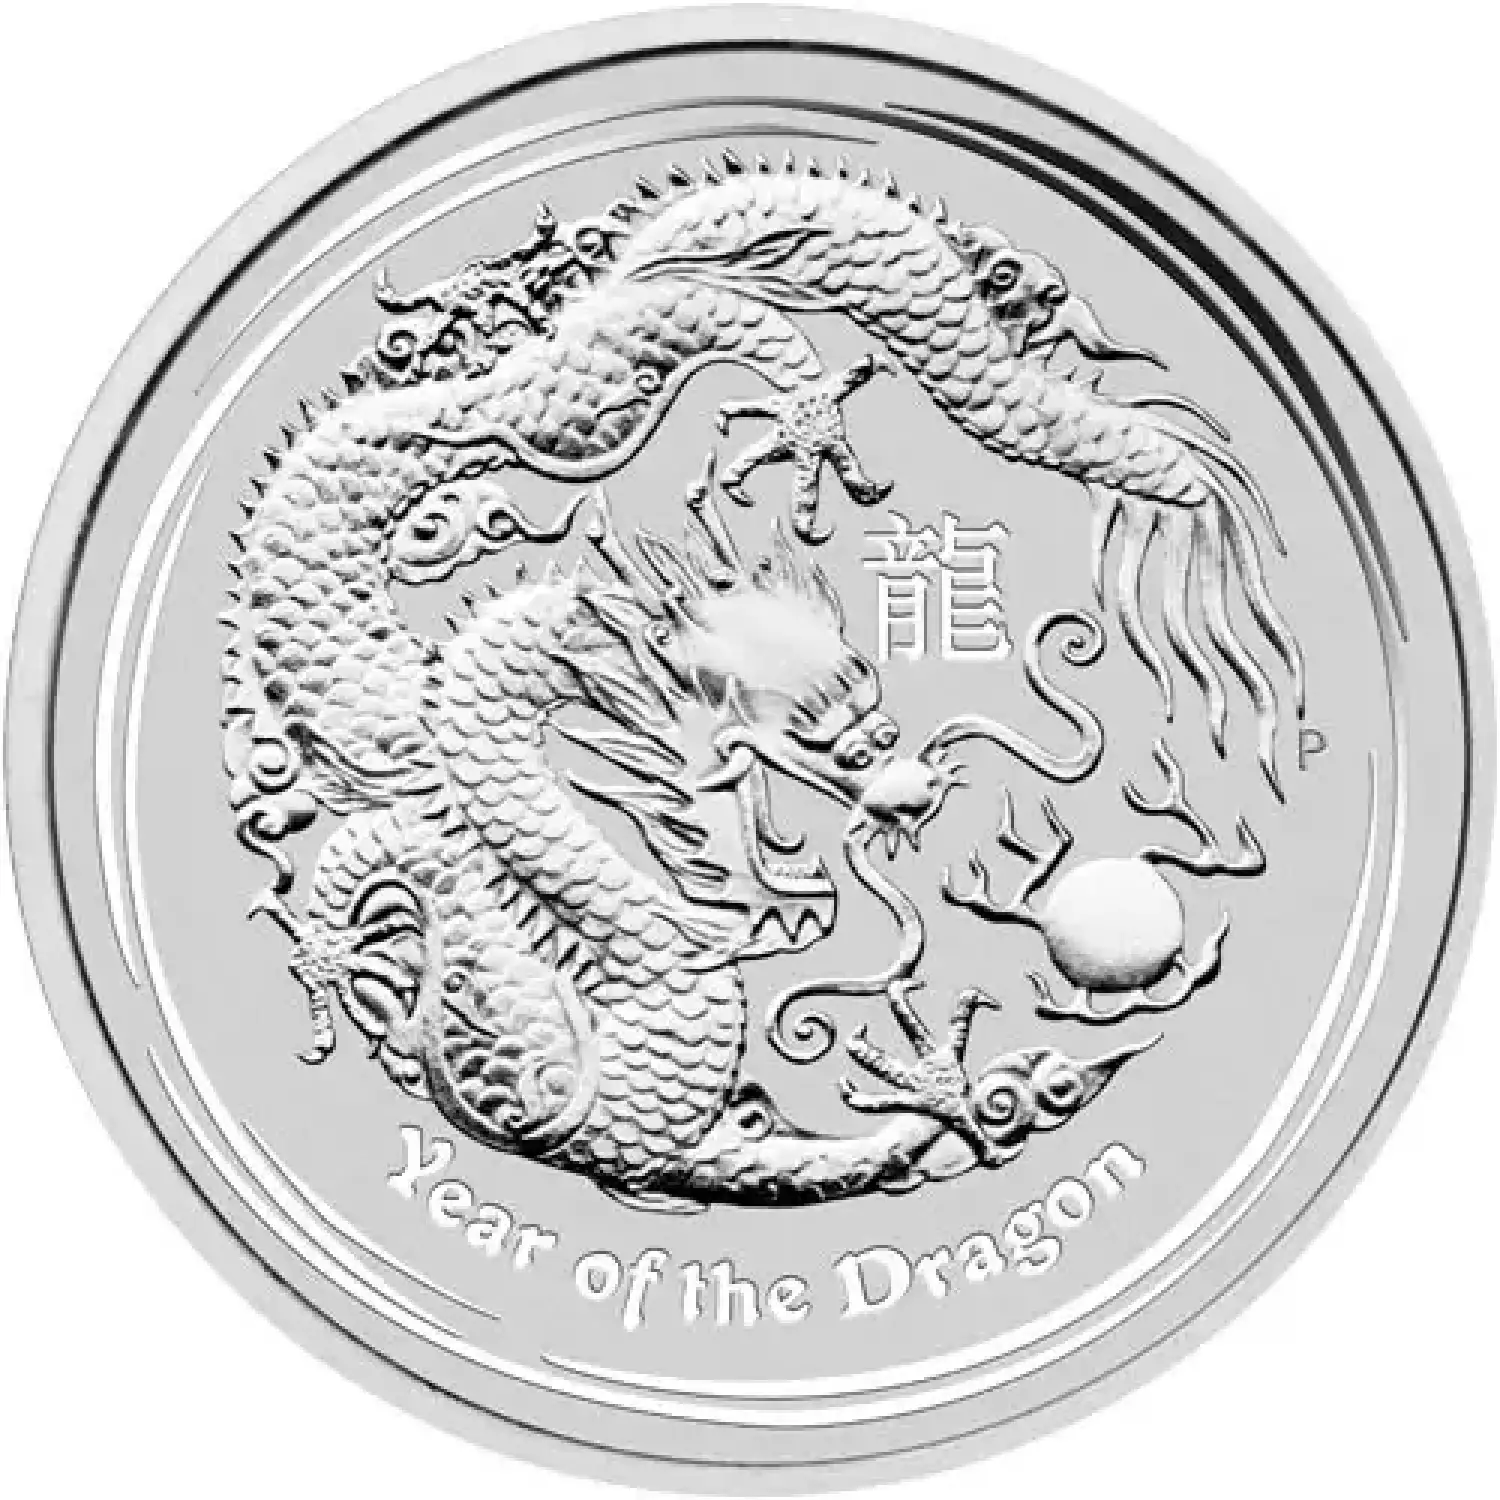 2012 Perth Mint Year of the Dragon 5 oz silver coin (2)